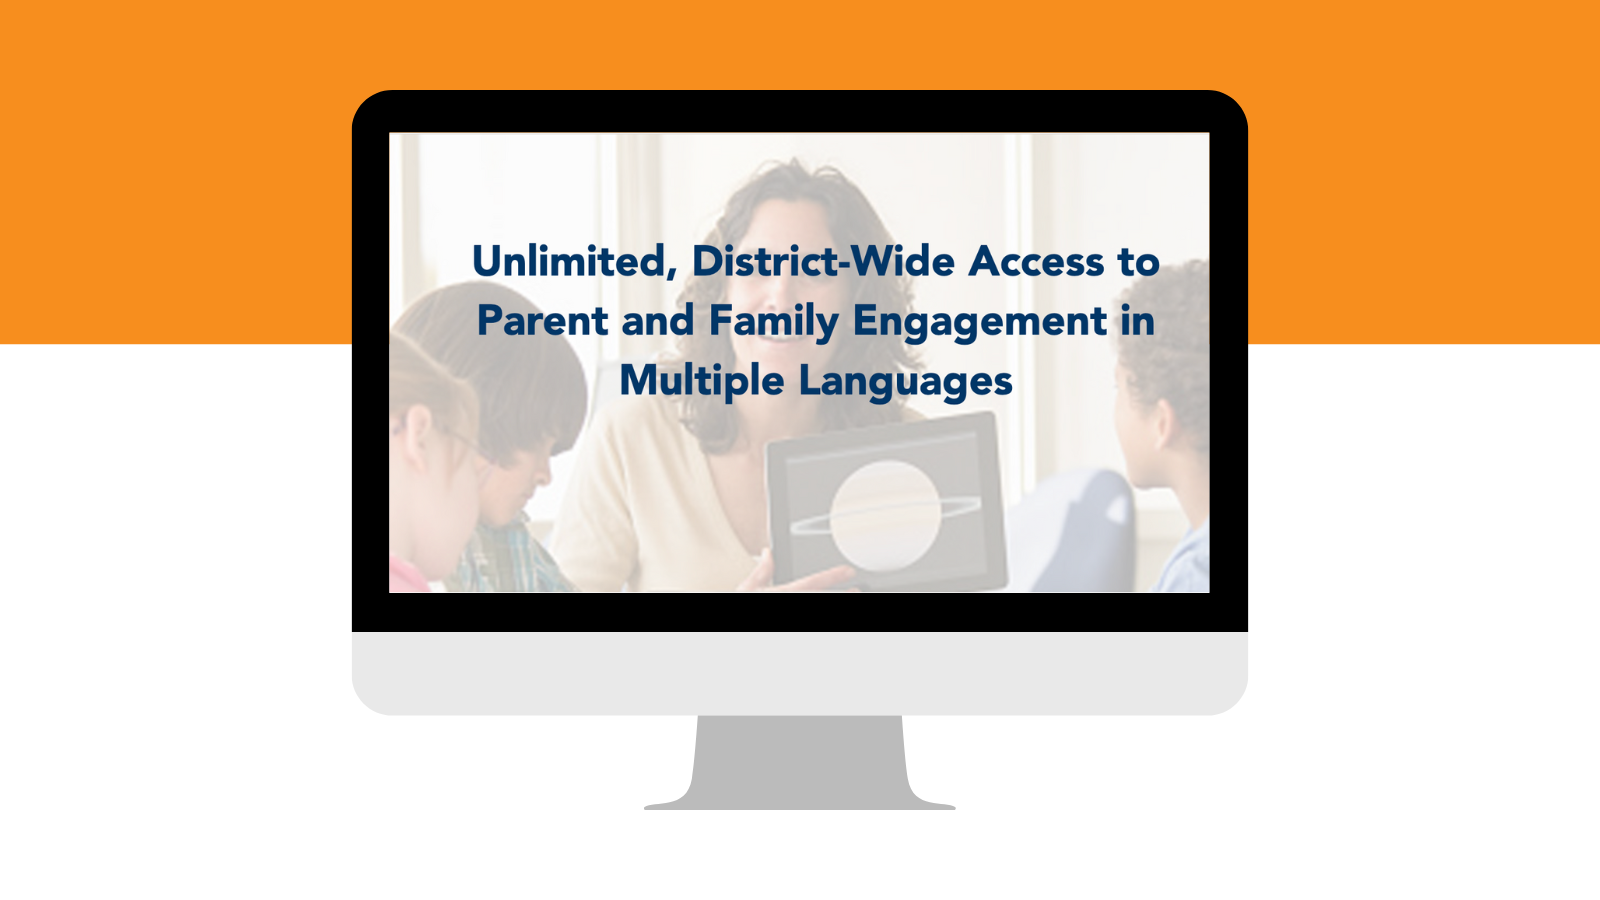 Unlimited, District-Wide Access to Parent and Family Engagement in Multiple Languages